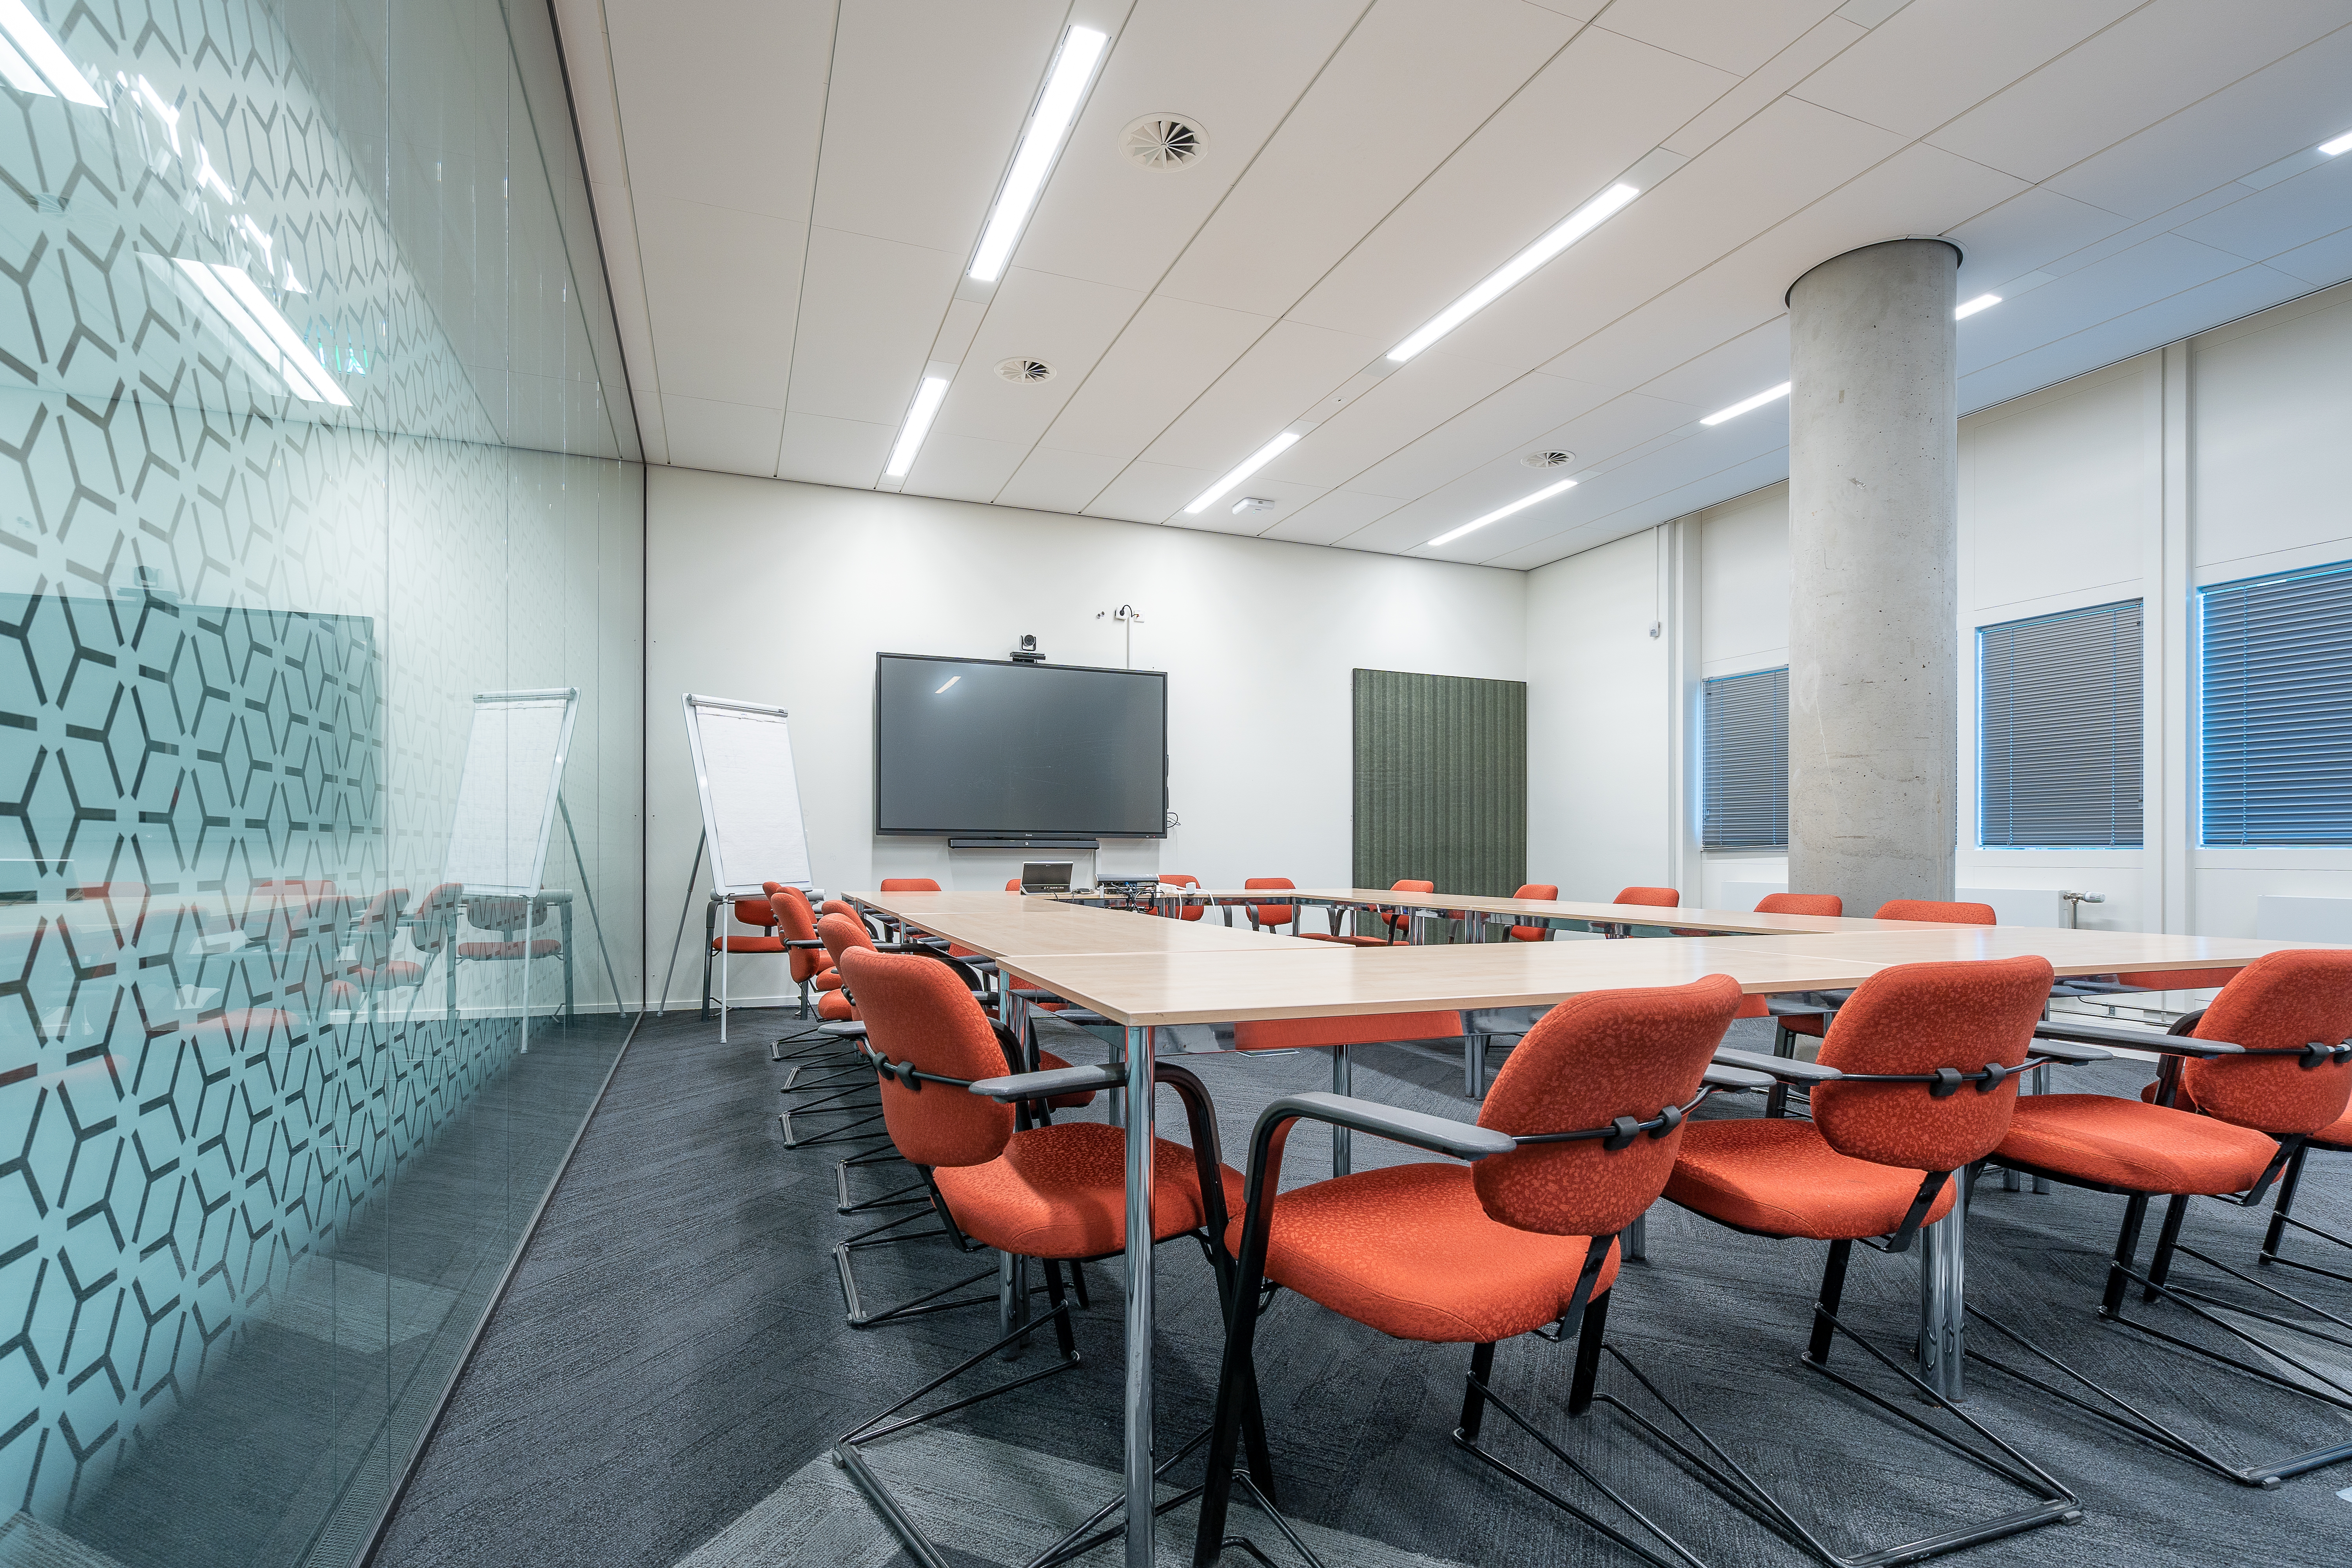 conference-room-interior-modern-office-with-white-walls-monitor.jpg